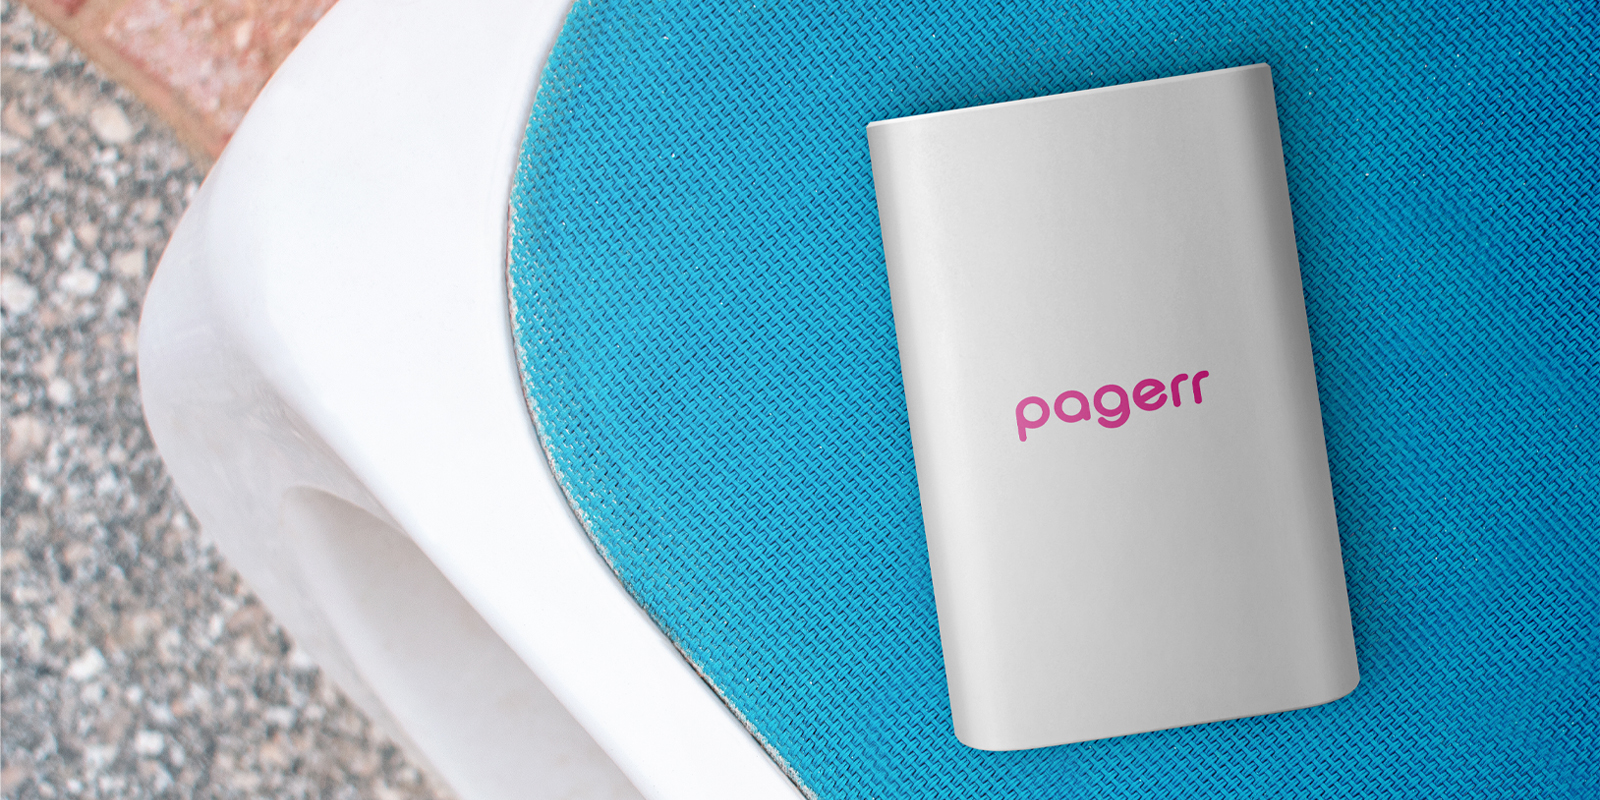 Chargers & power banks in Warsaw - Print with Pagerr